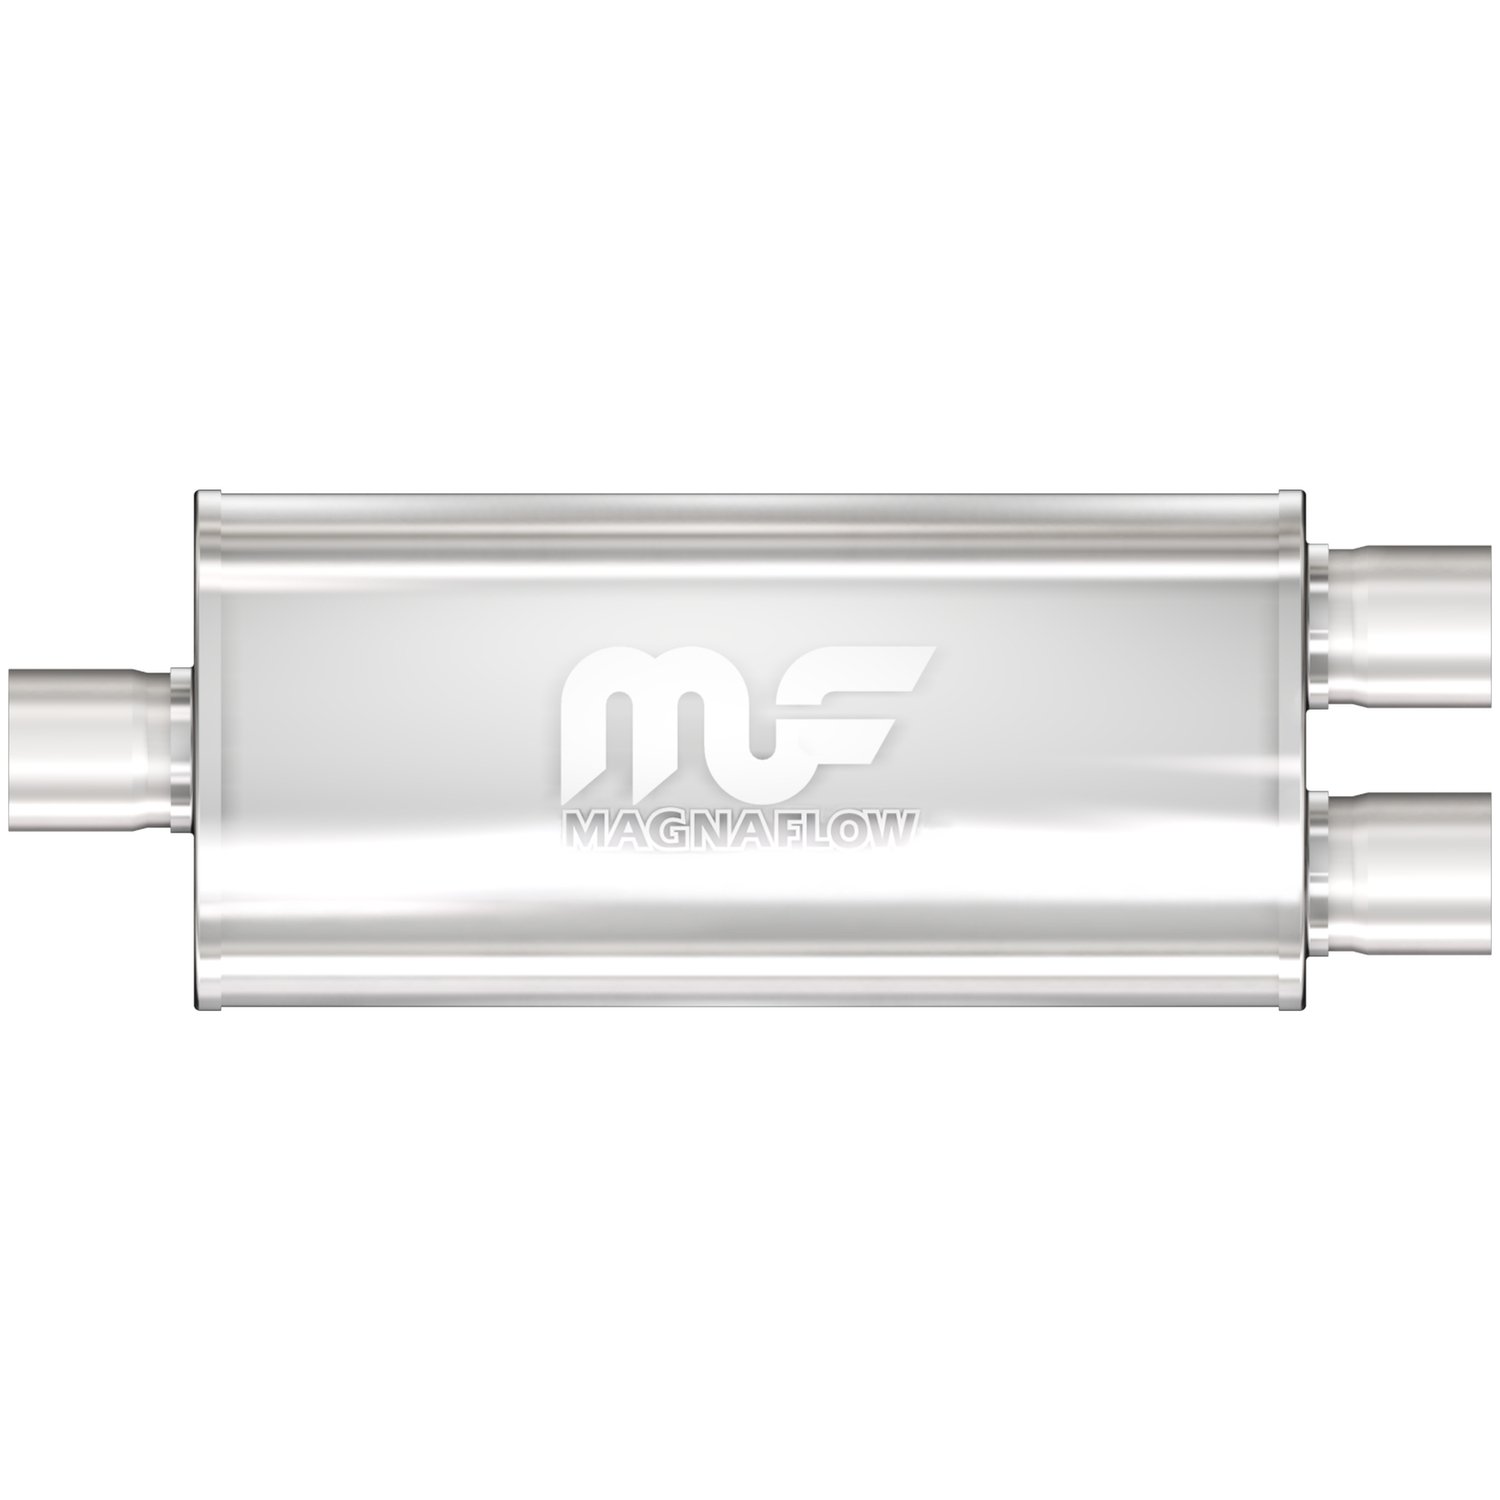 5" x 8" Oval Muffler Center In/Dual Out: 2.5" /2.5" Body Length: 14" Overall Length: 20" Core Size: 2.5" Satin Finish